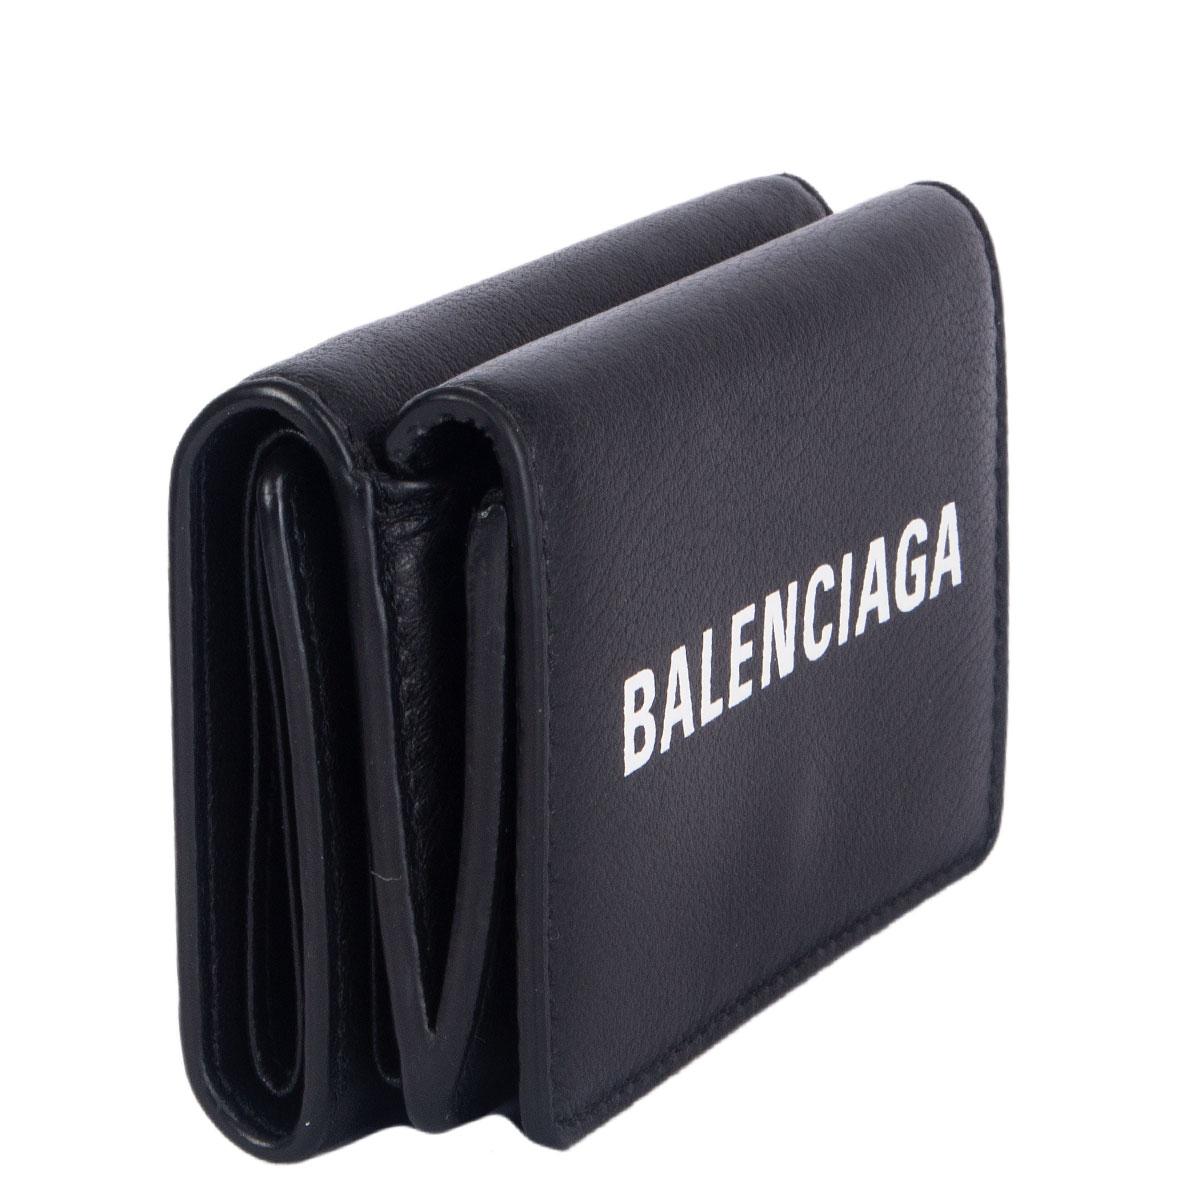 100% authentic Balenciaga Cash Mini Wallet in black smooth calfskin featuring white printed logo at front. Opens with 2 push-buttons and has 4 credit card slots, 1 bill compartment and one coin pocket. Has been carried and is is in excellent